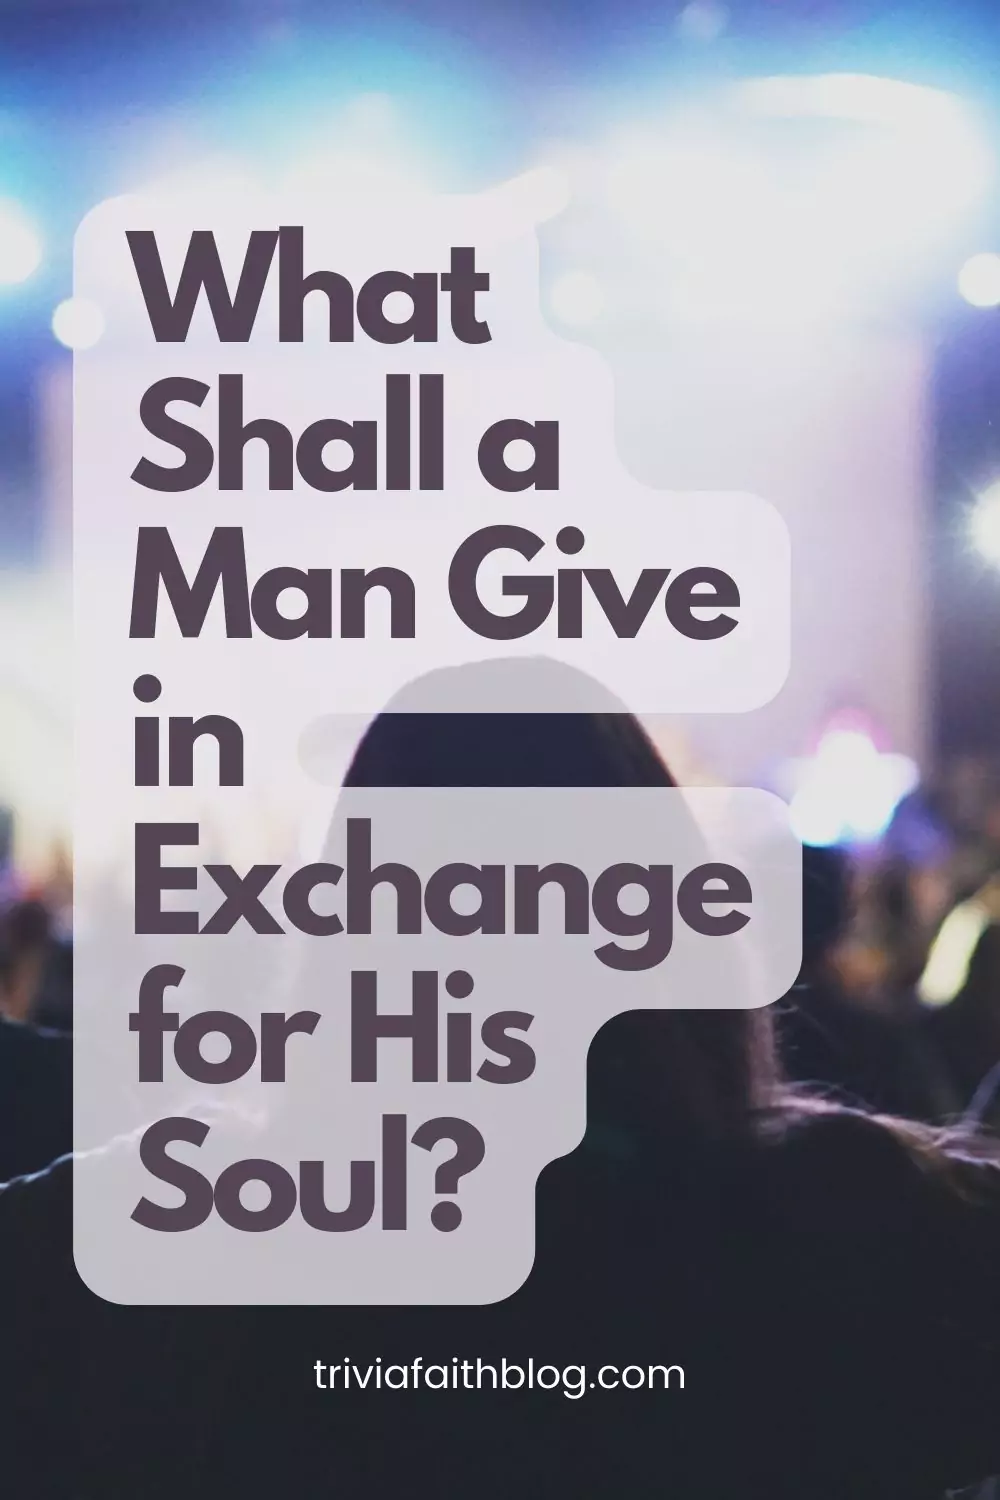 What Shall a Man Give in Exchange for His Soul